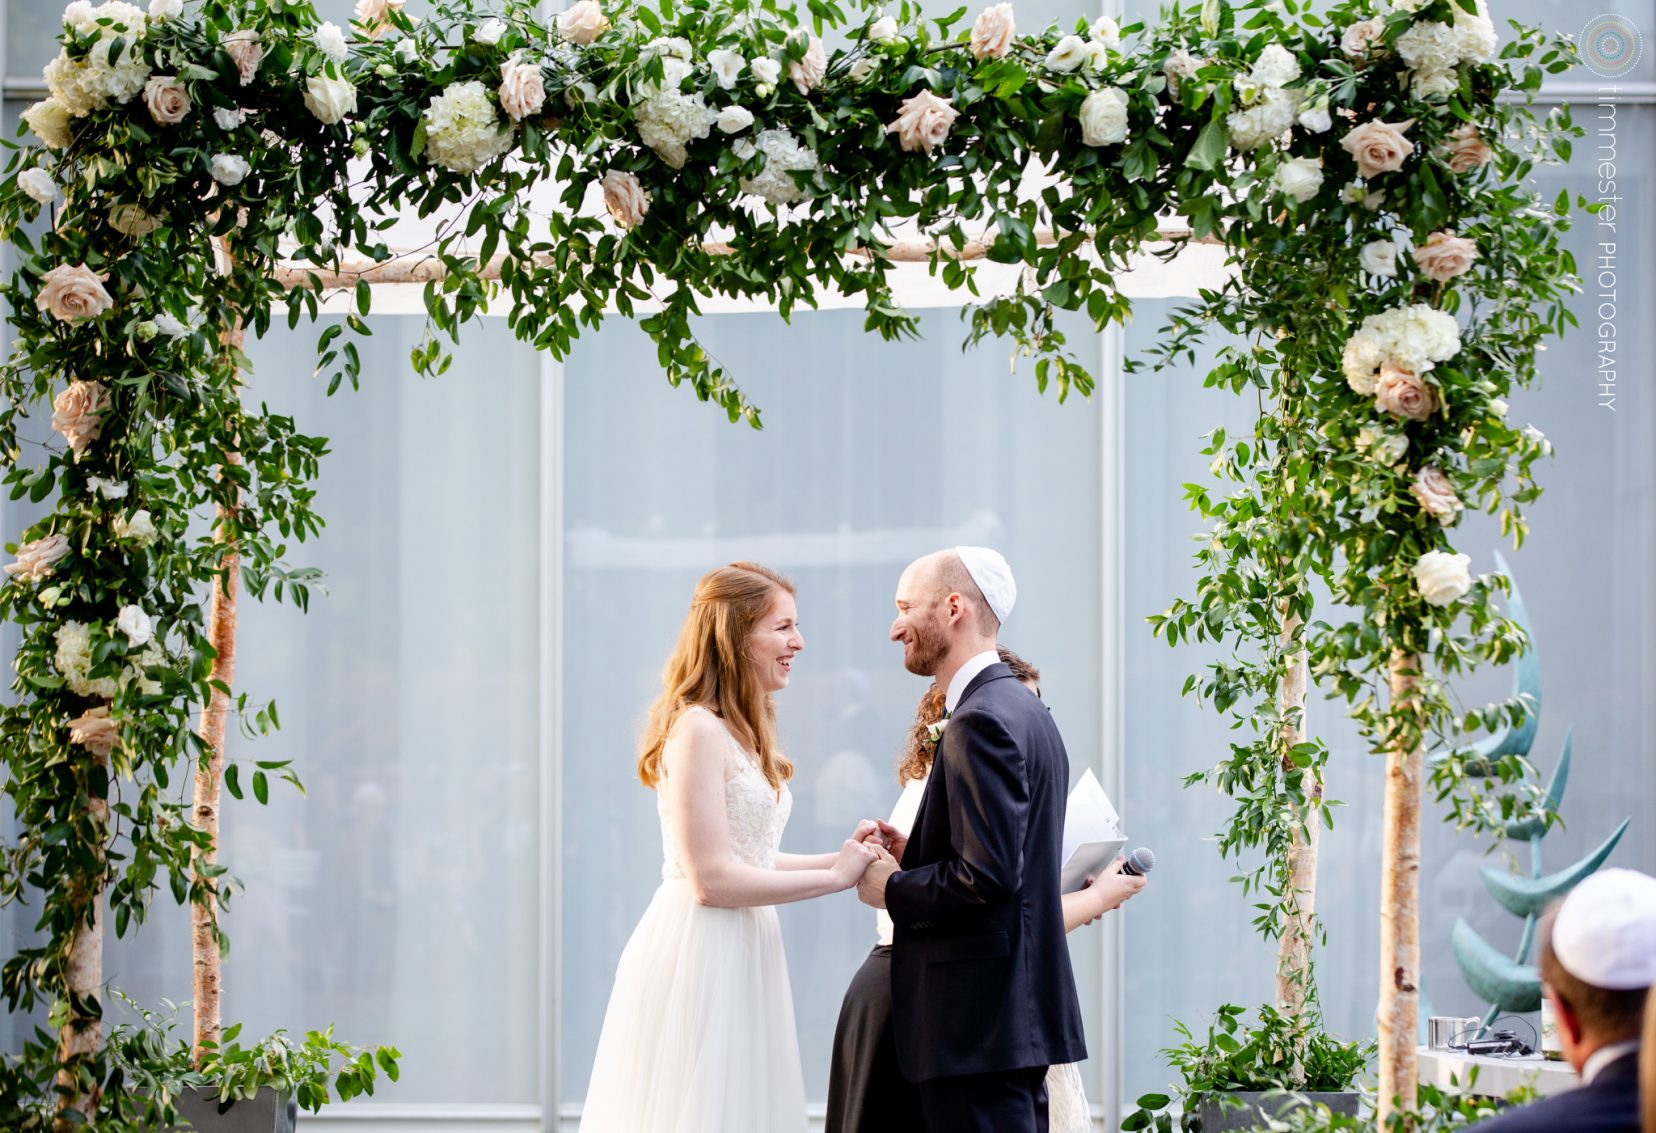 A beautiful outdoor ceremony at the North Carolina Museum of Art in Raleigh.